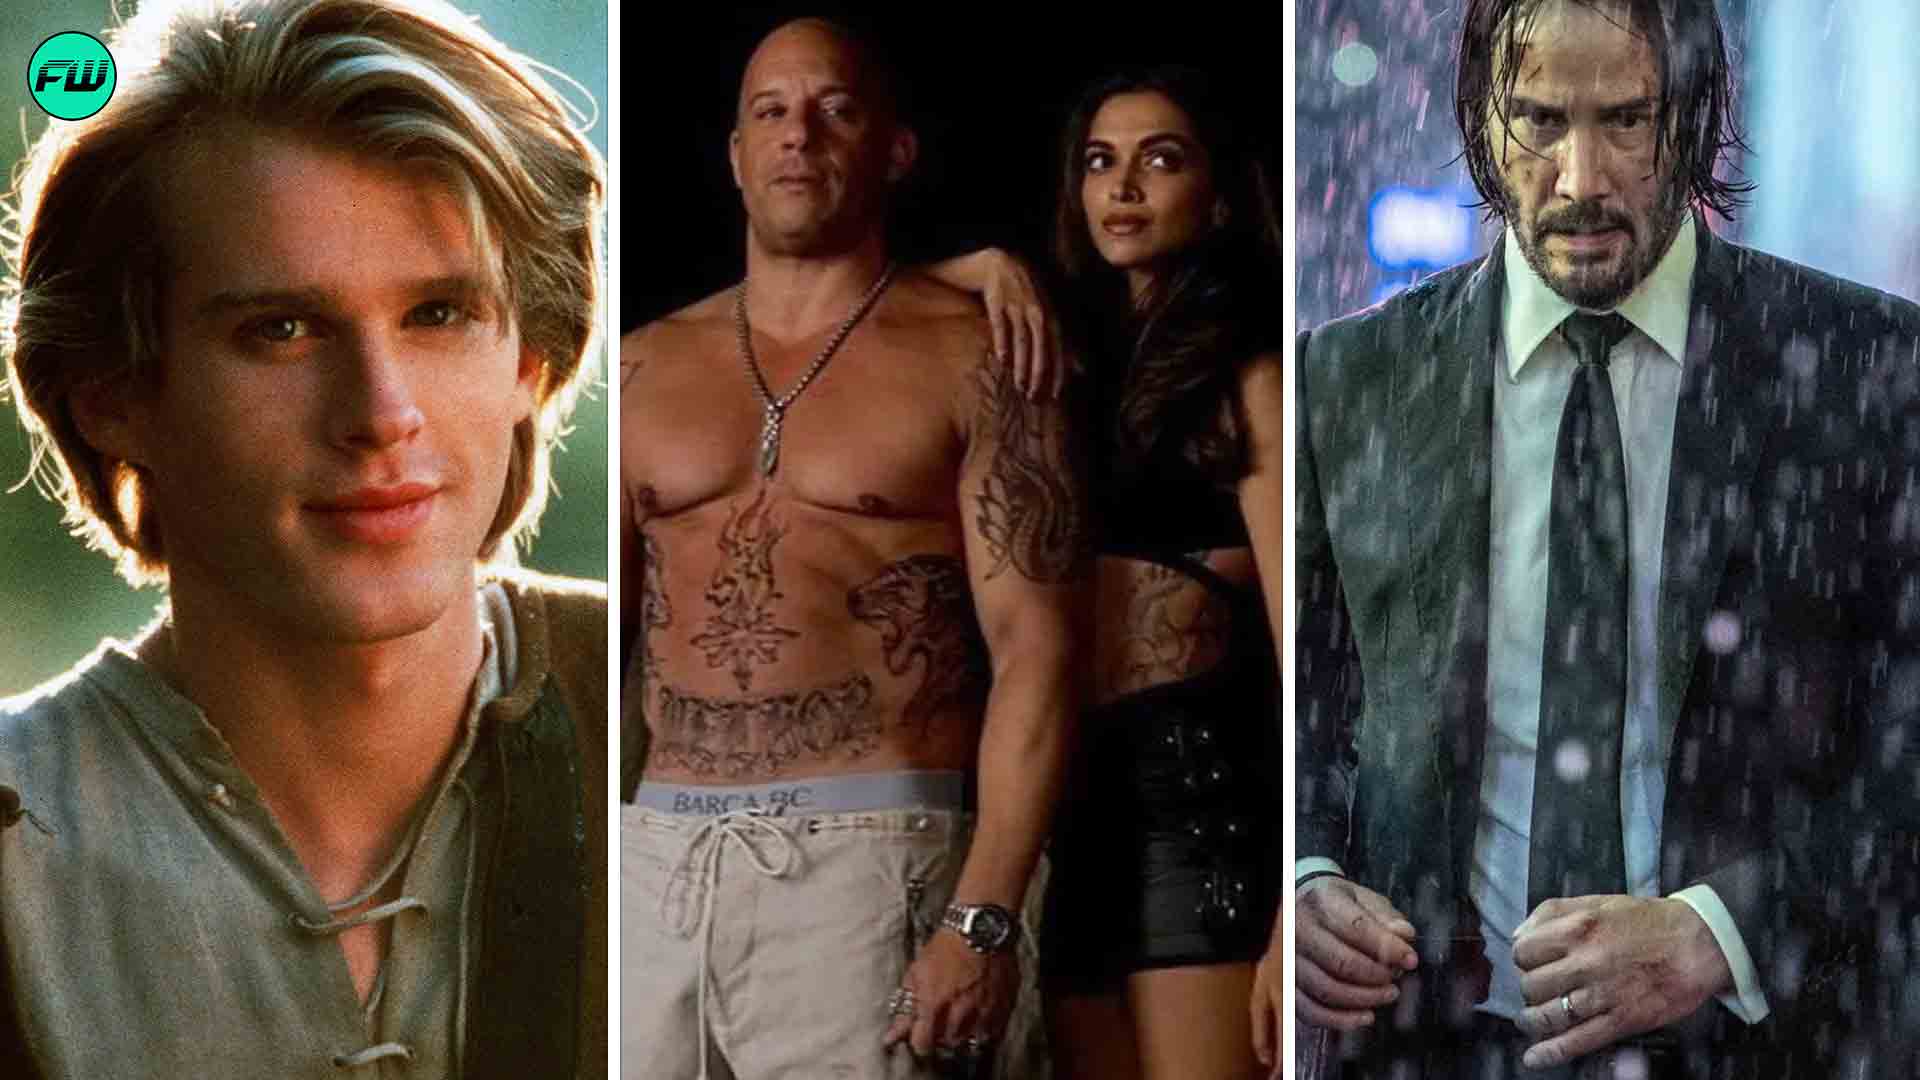 16 Wild Behind The Scenes Stories From Iconic Action Movies